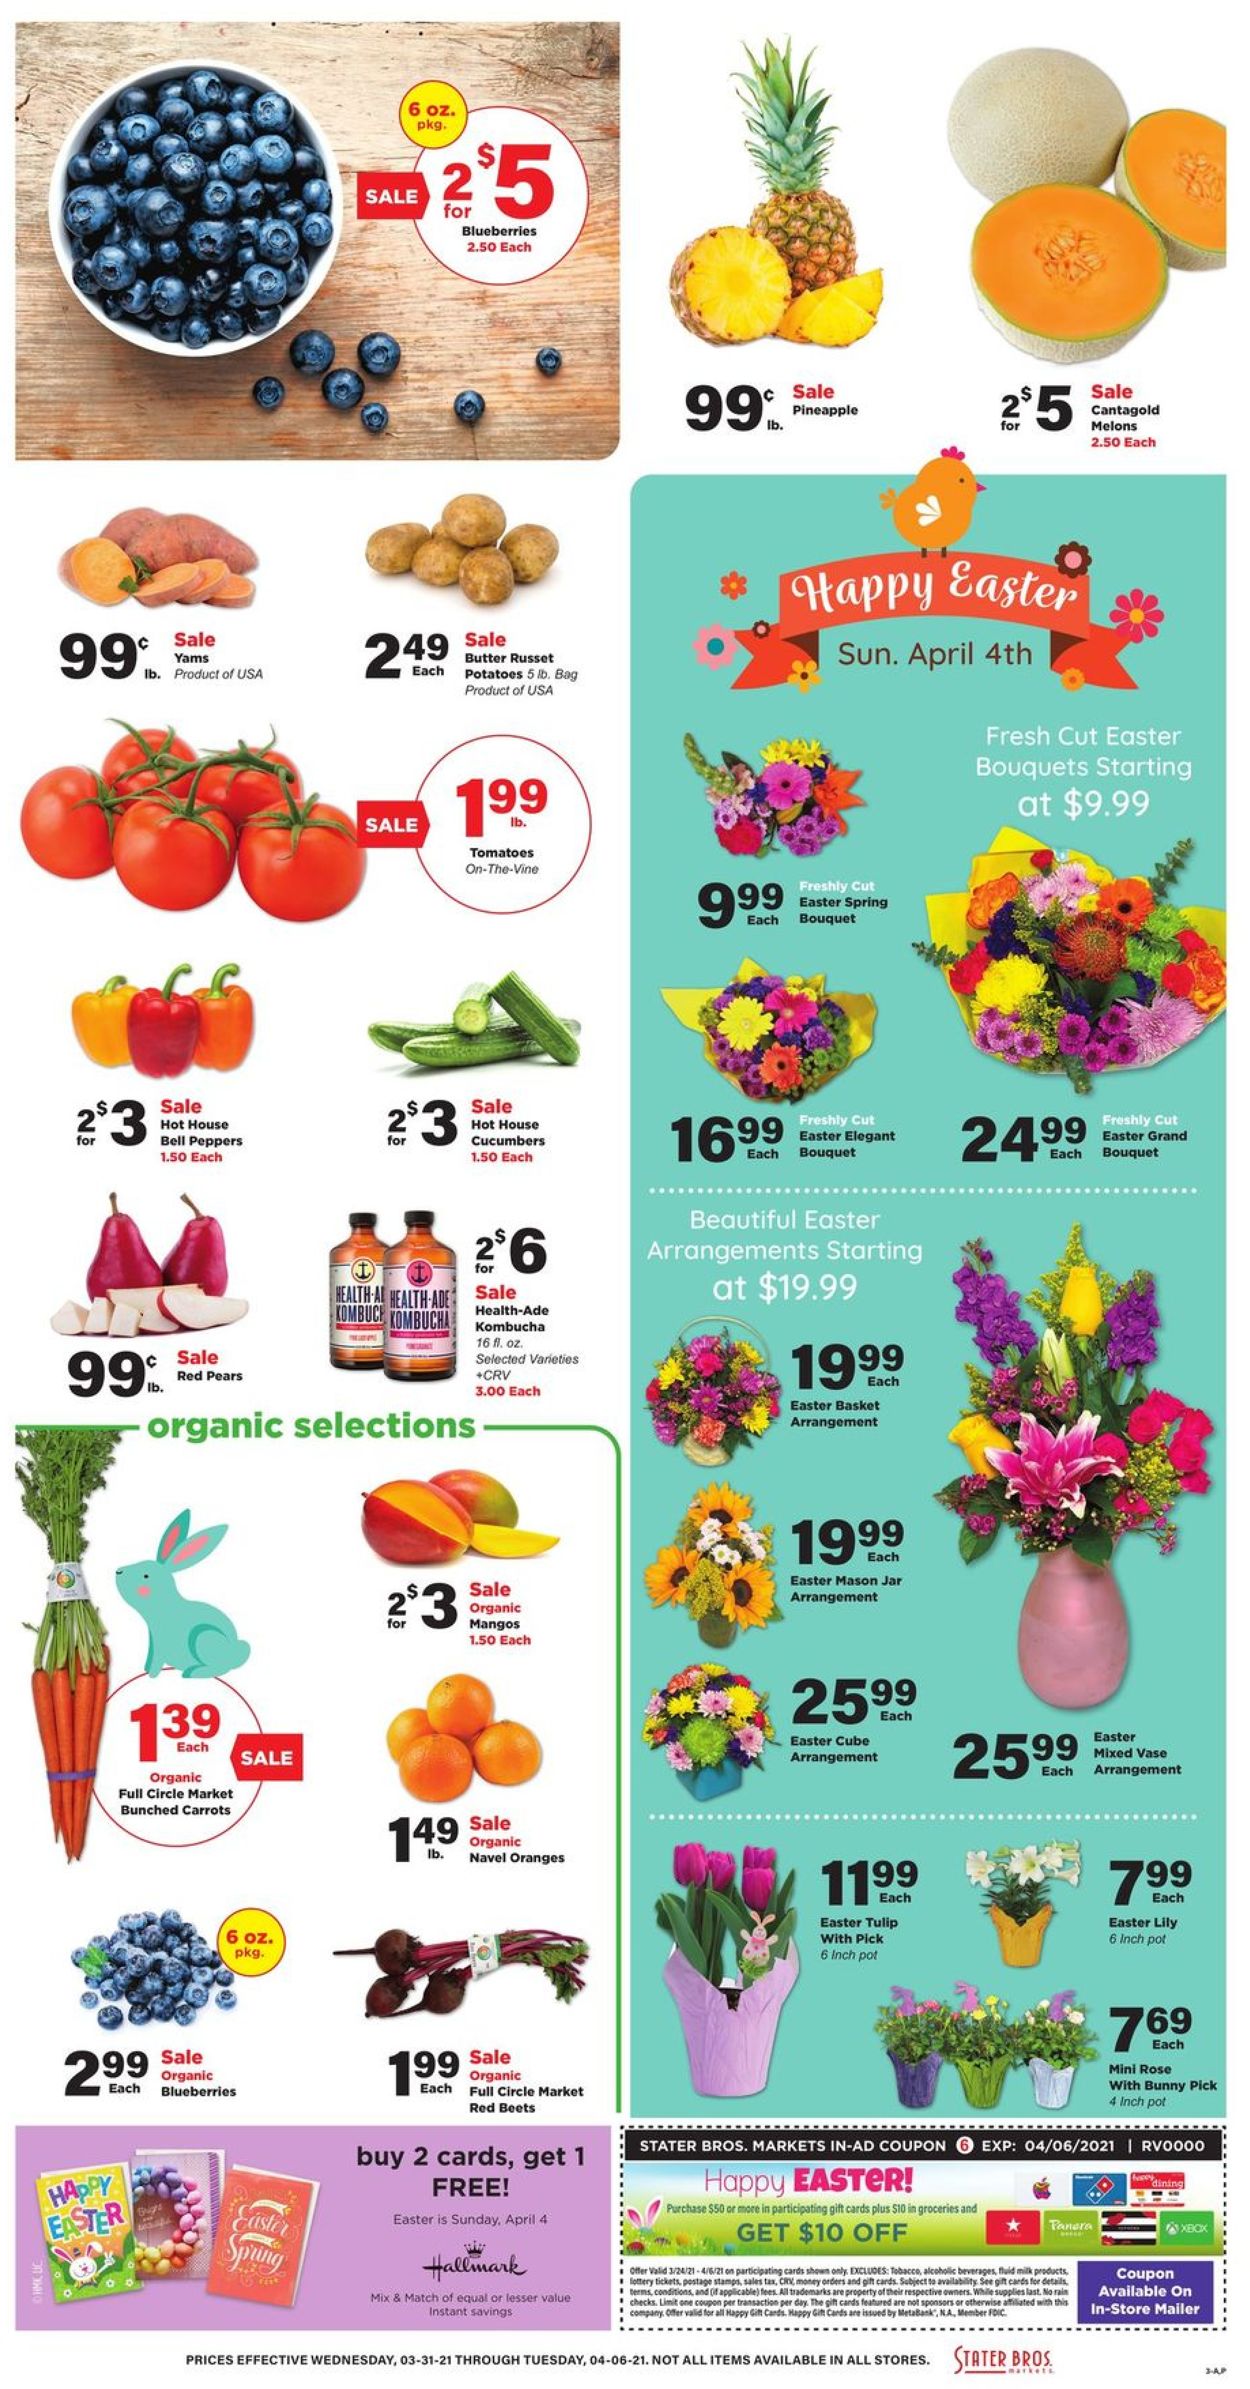 Stater Bros. - Easter 2021 Ad Weekly Ad Circular - valid 03/31-04/06/2021 (Page 3)